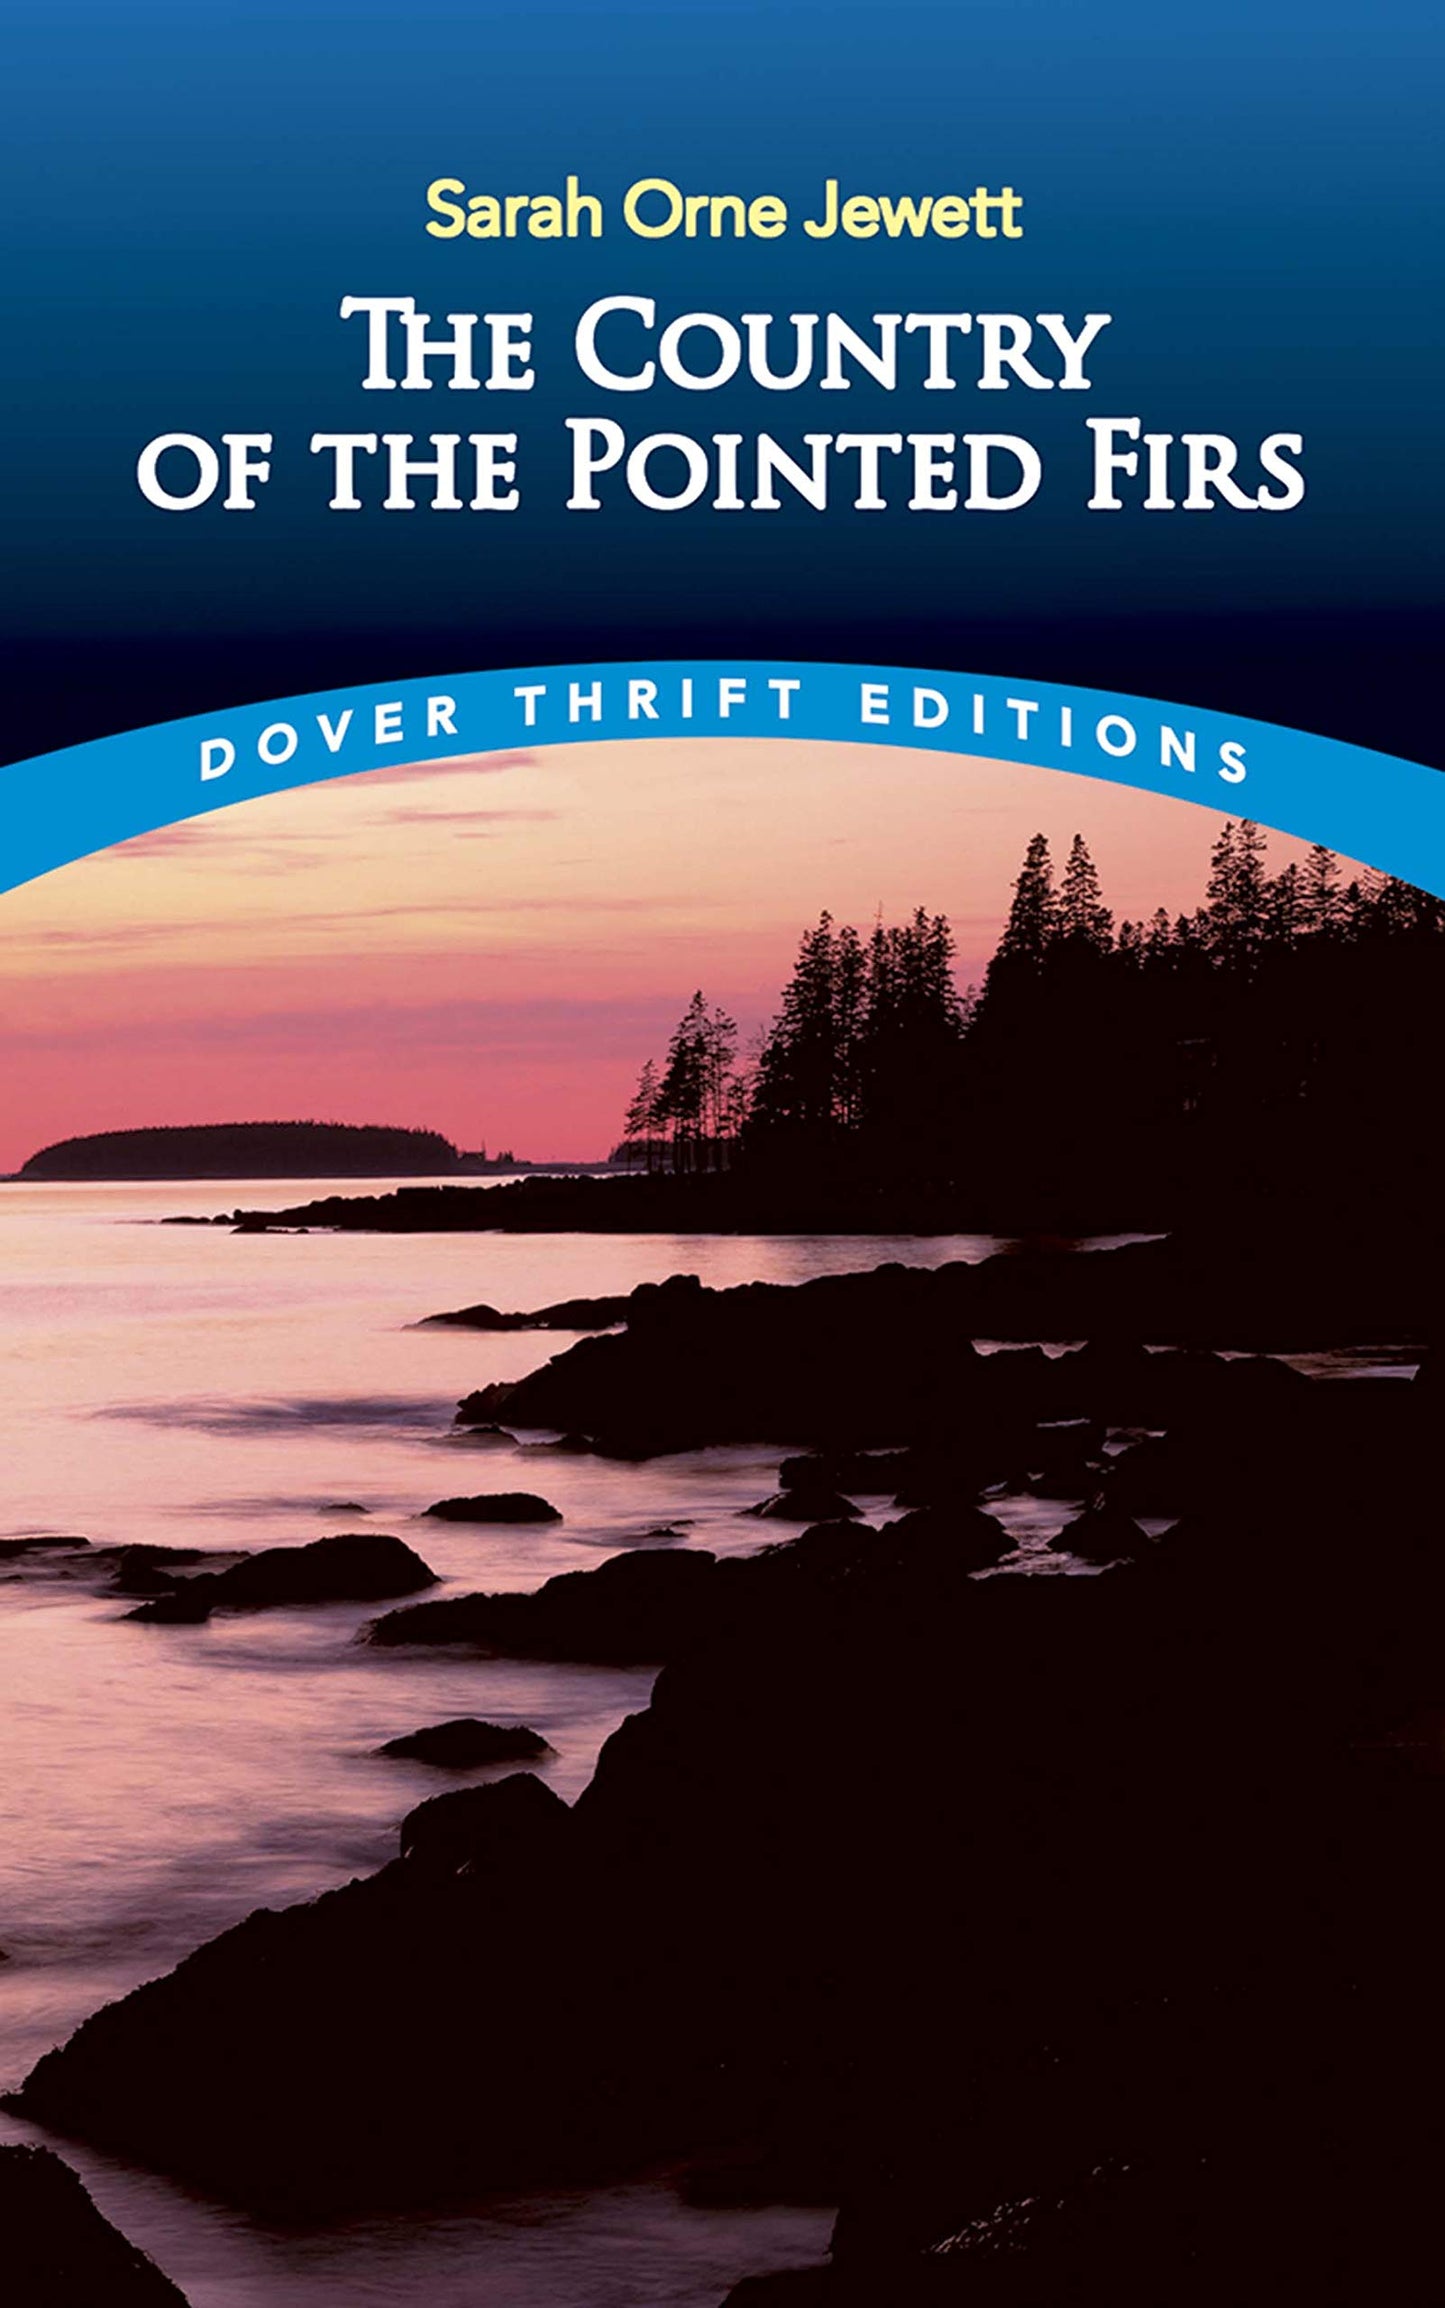 COUNTRY OF THE POINTED FIRS - Virginia Book Company